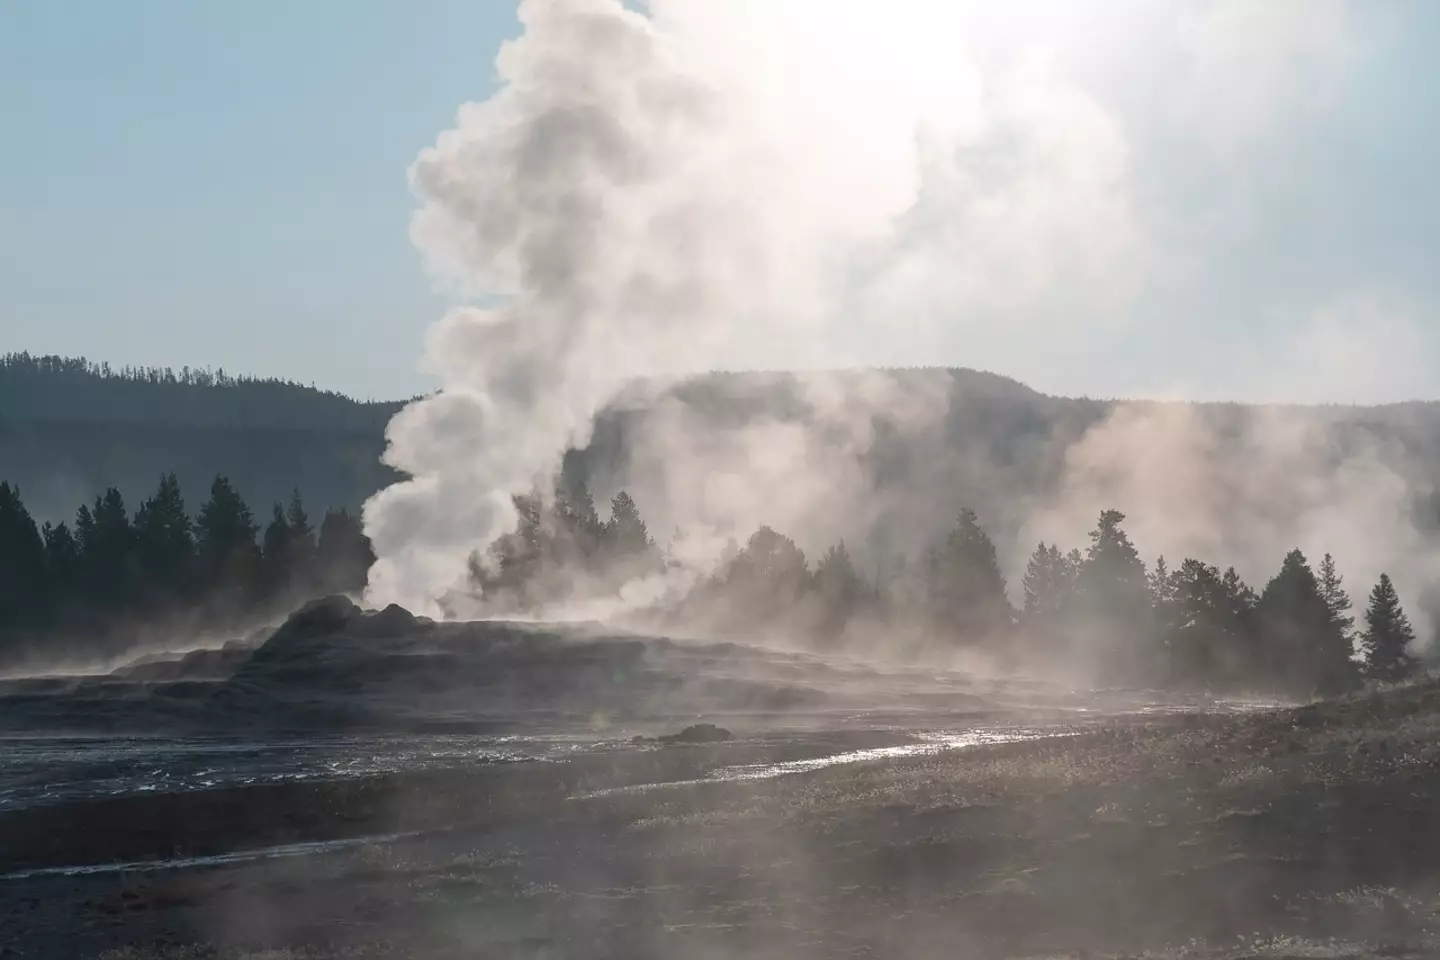 The hot springs in Yellowstone are not safe for humans to enter.